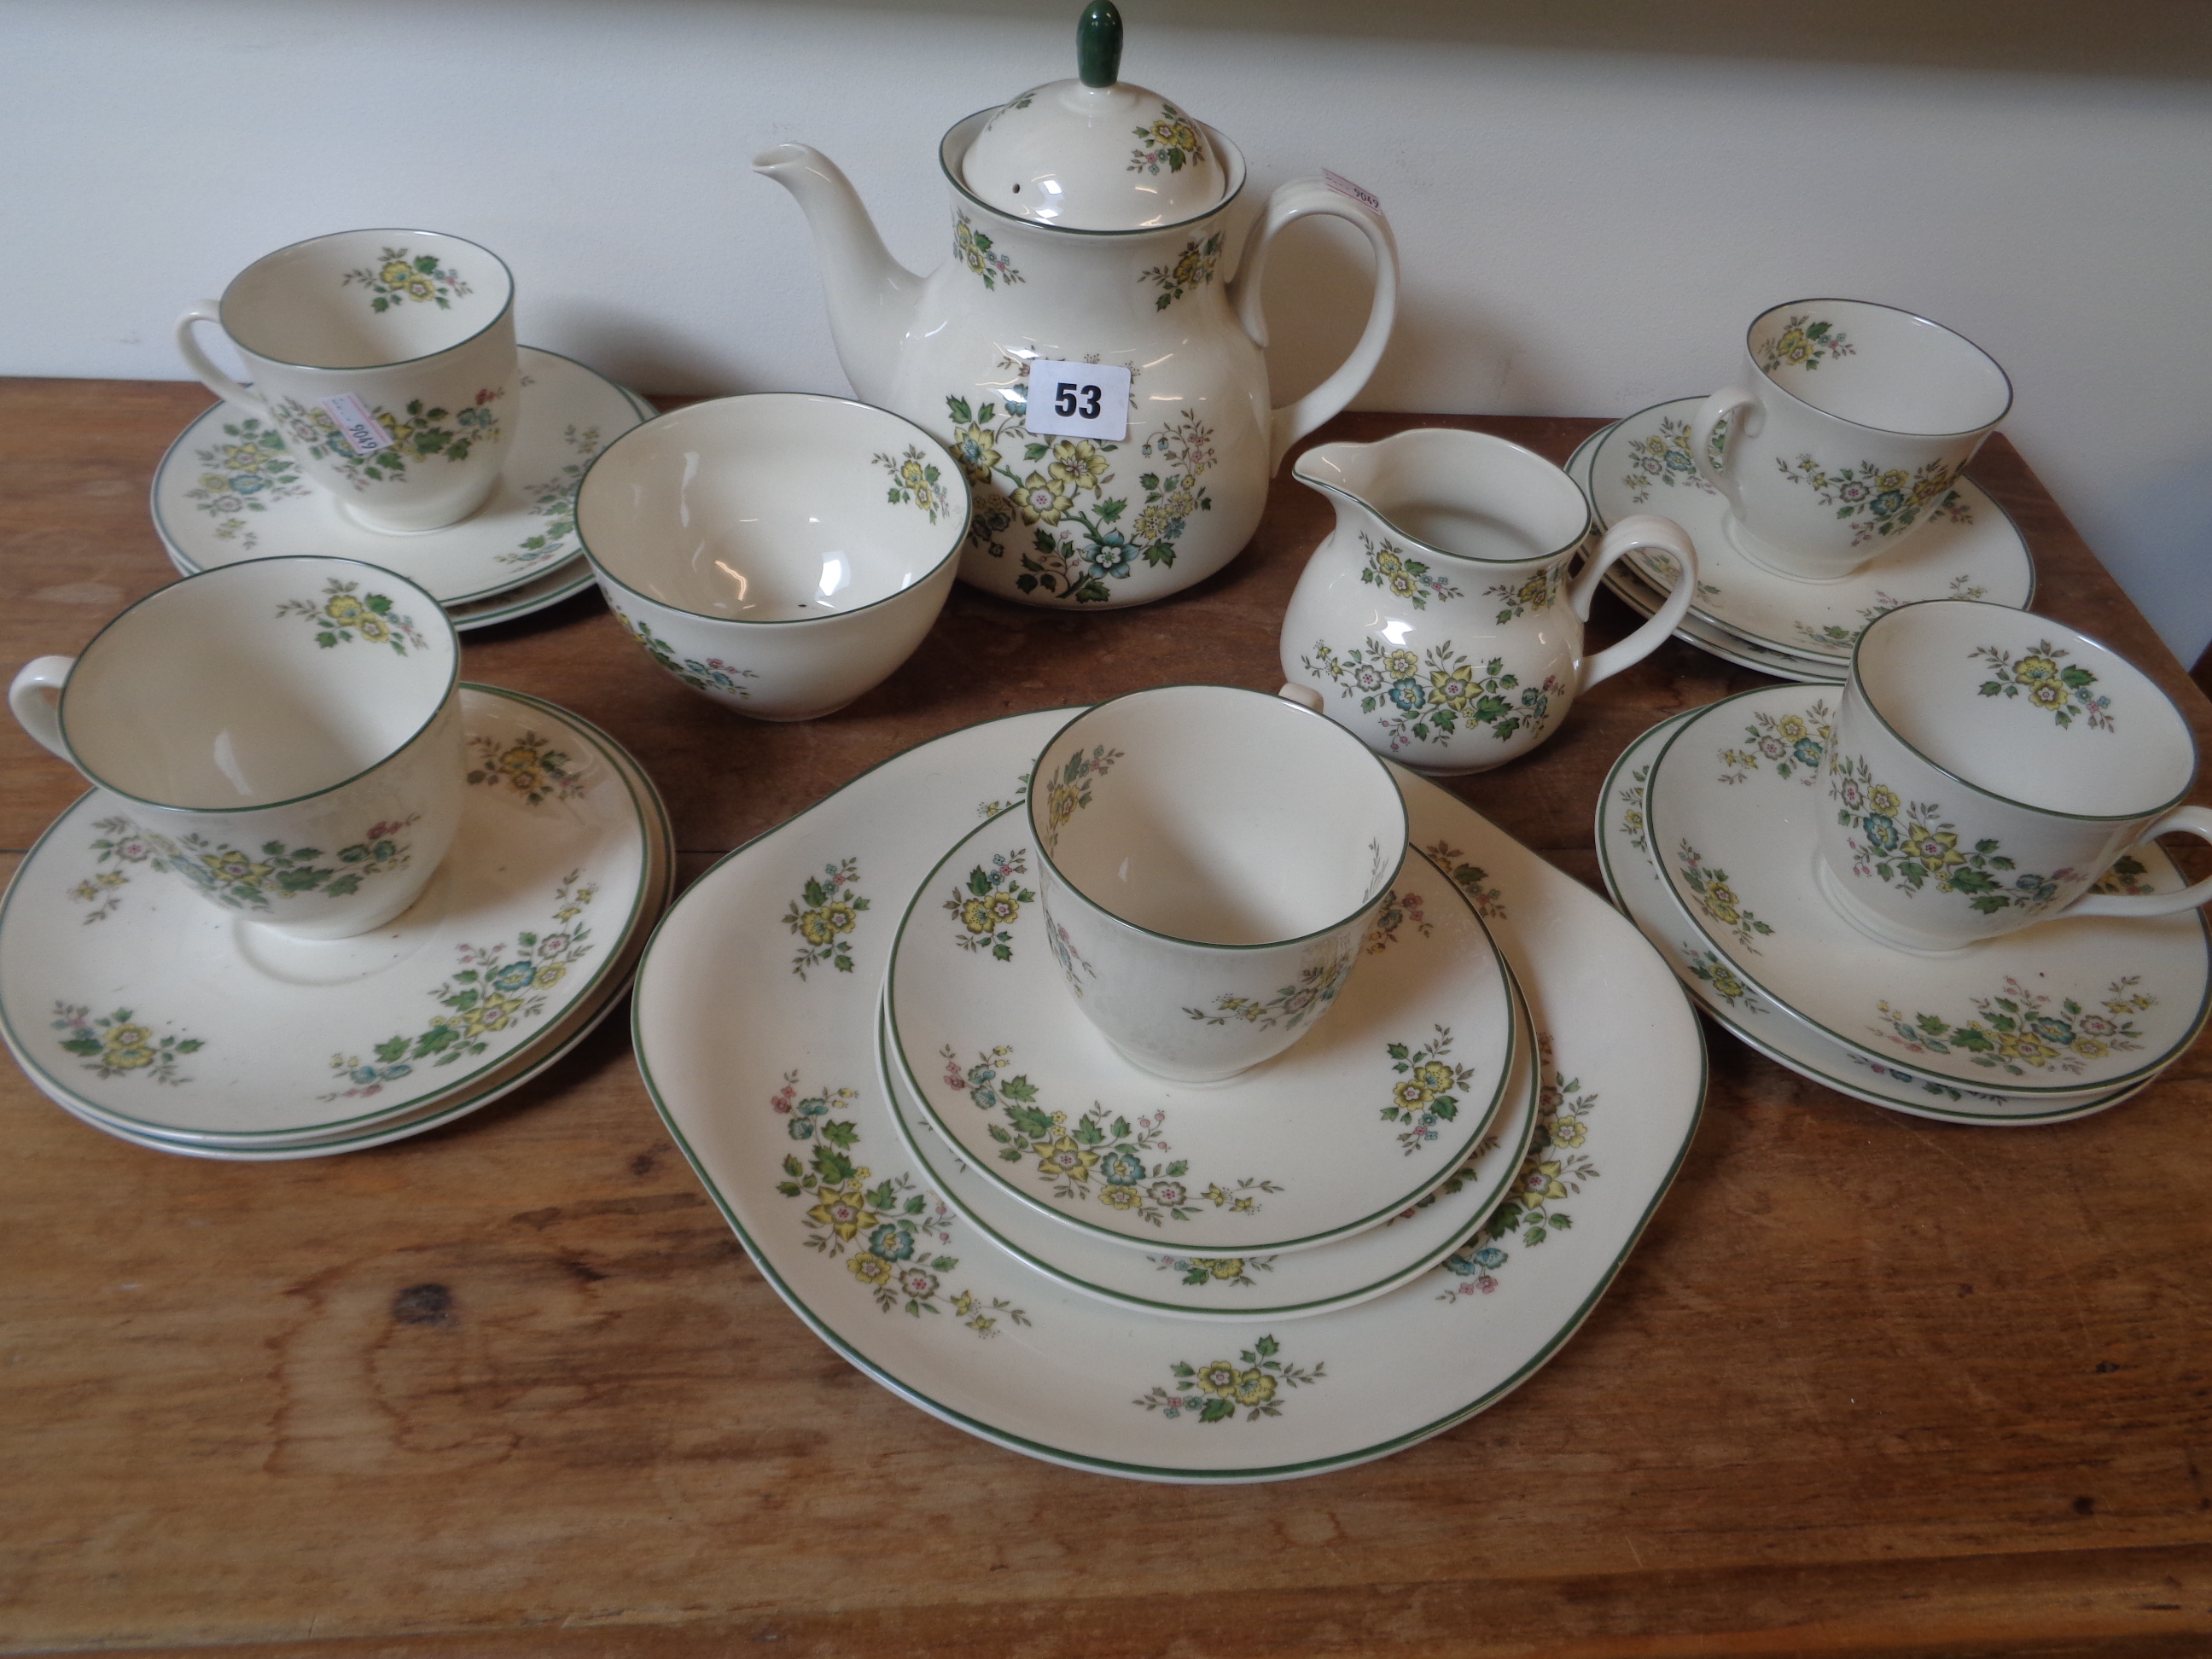 Royal Doulton 'Campagna' pattern tea set for 5, Condition - Good Overall